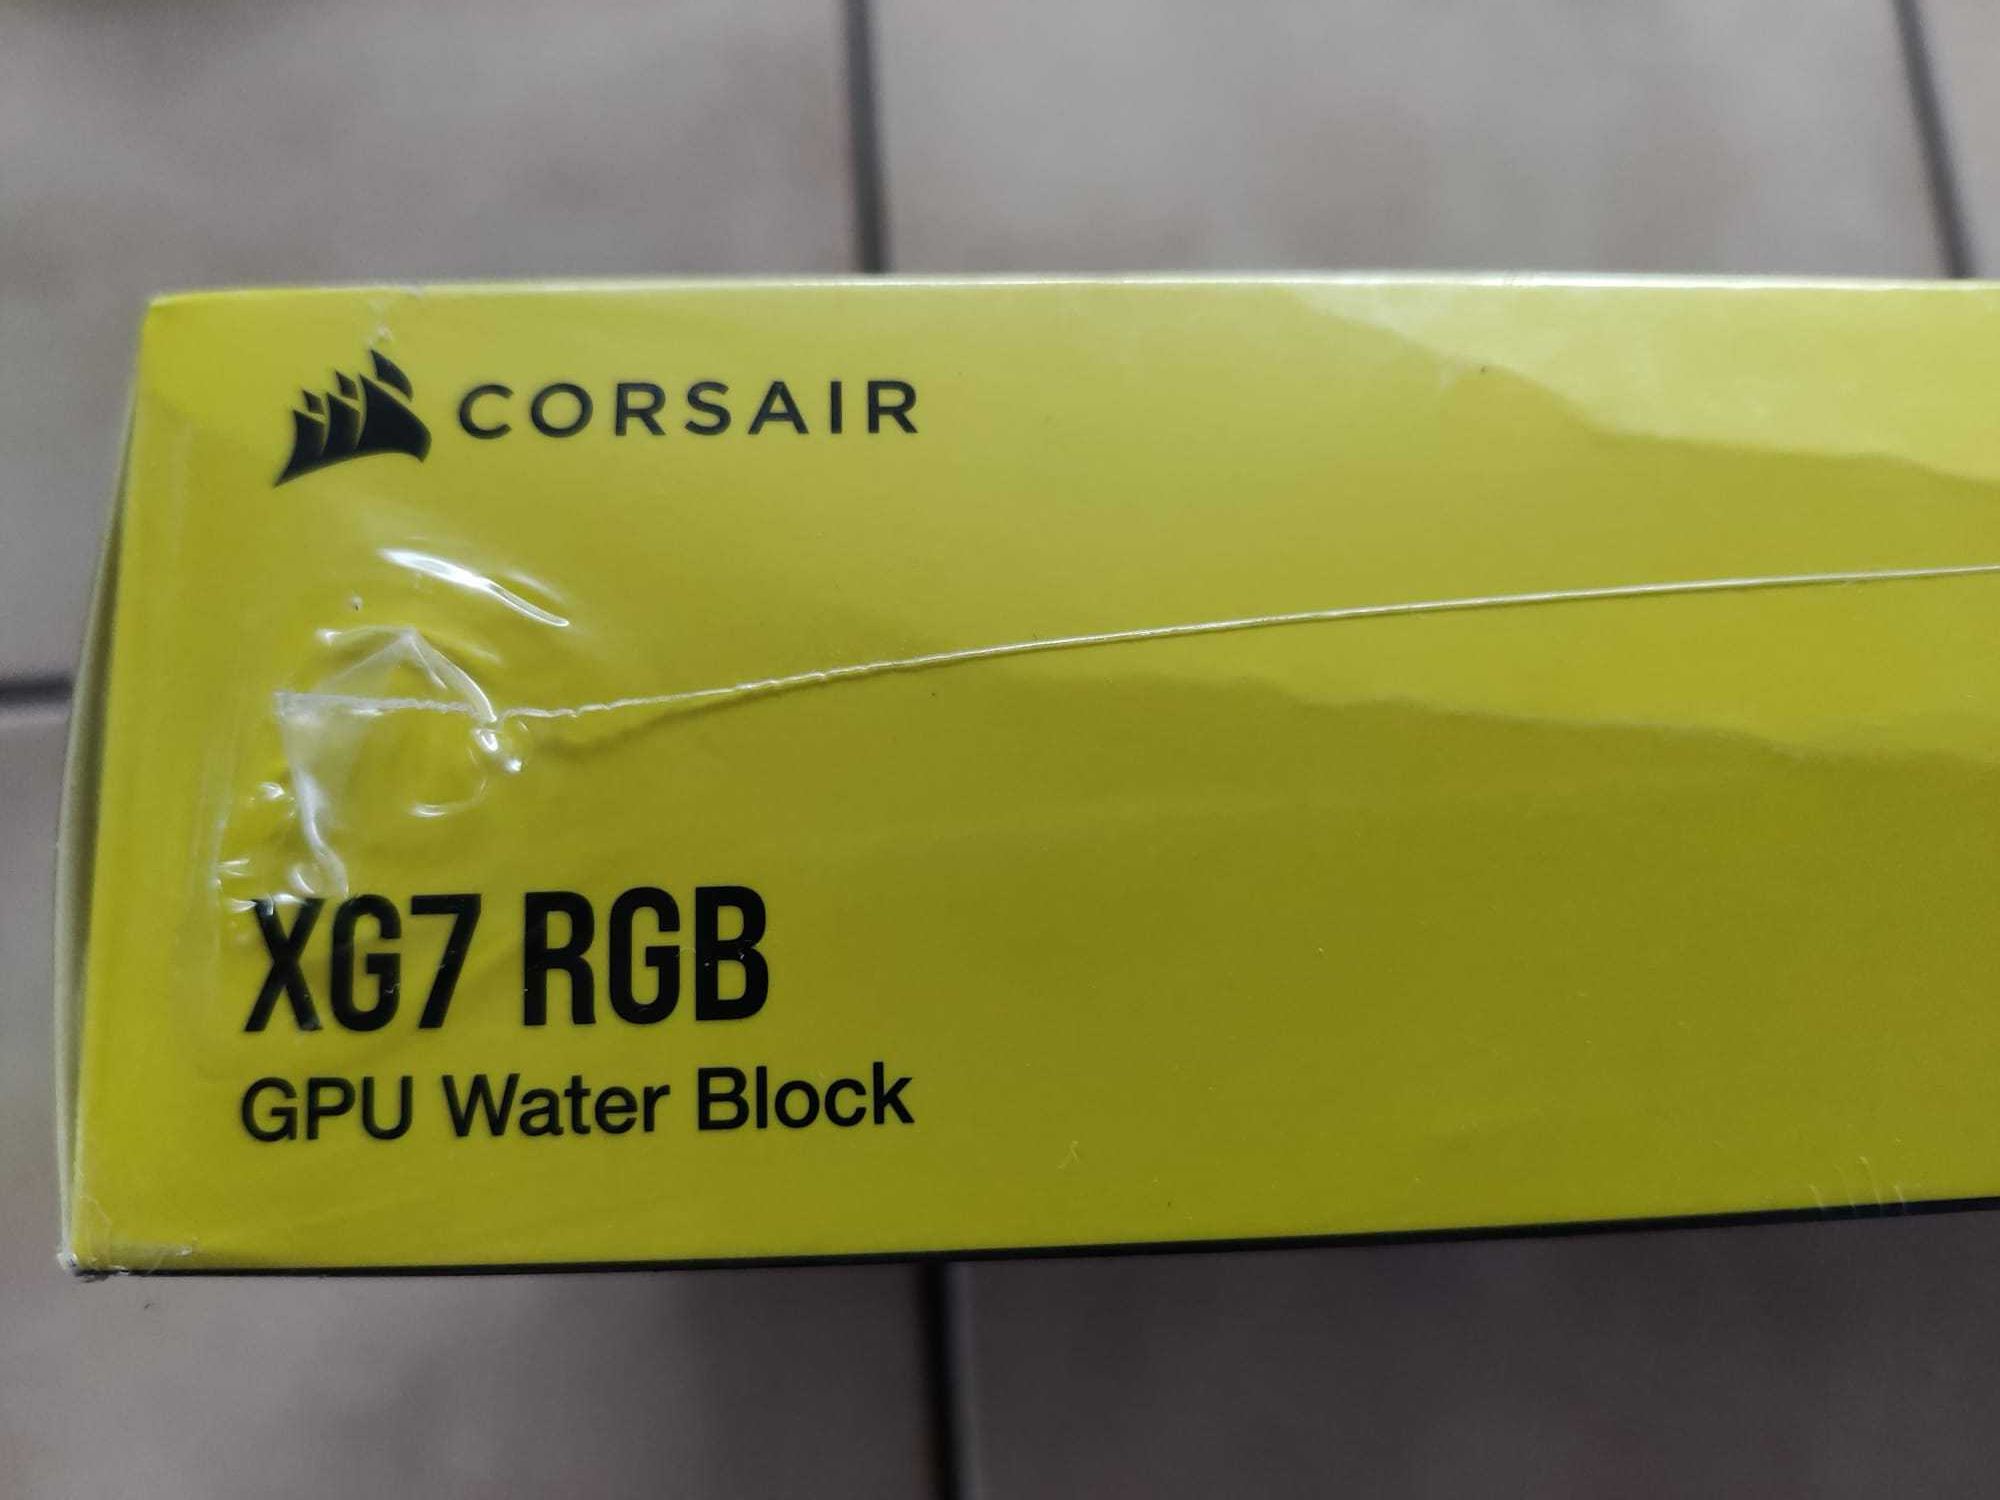 Cooler lichid Corsair RGB pt RTX3080 Founders Edition